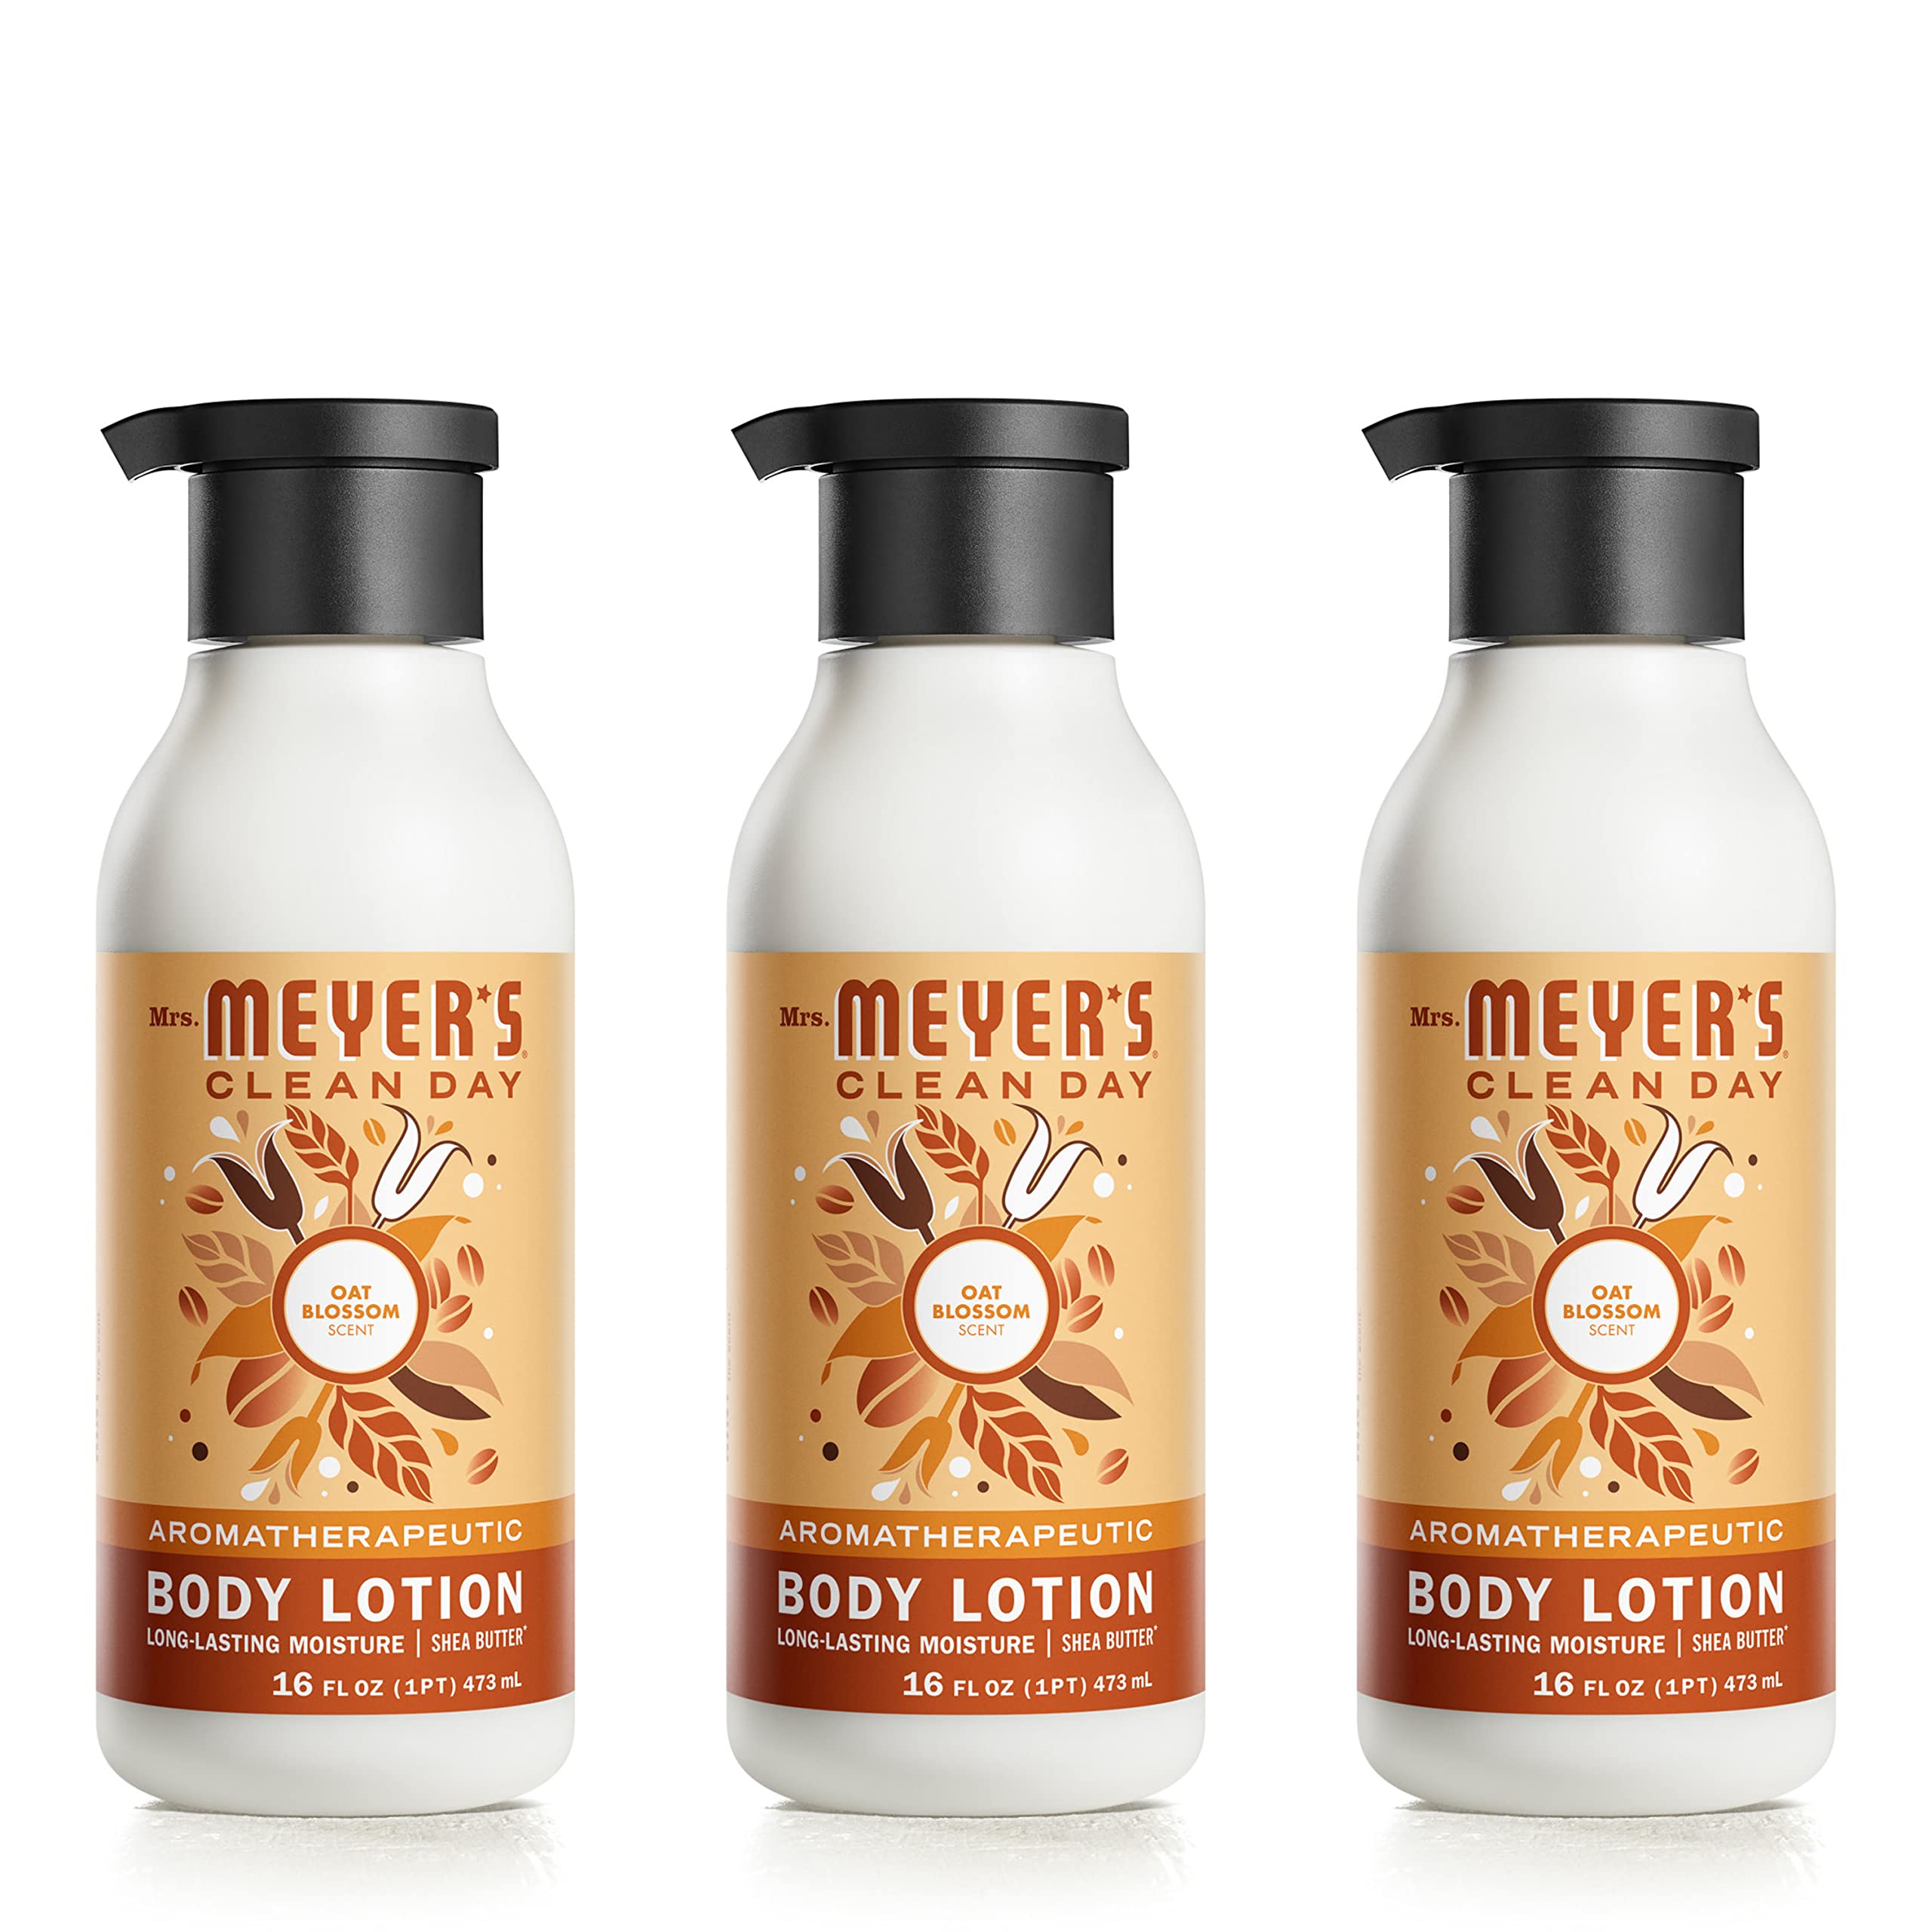 Mrs. Meyer's Body Lotion for Dry Skin, Non-Greasy Moisturizer Made with Essential Oils, Oat Blossom, 16 fl. oz - Pack of 3